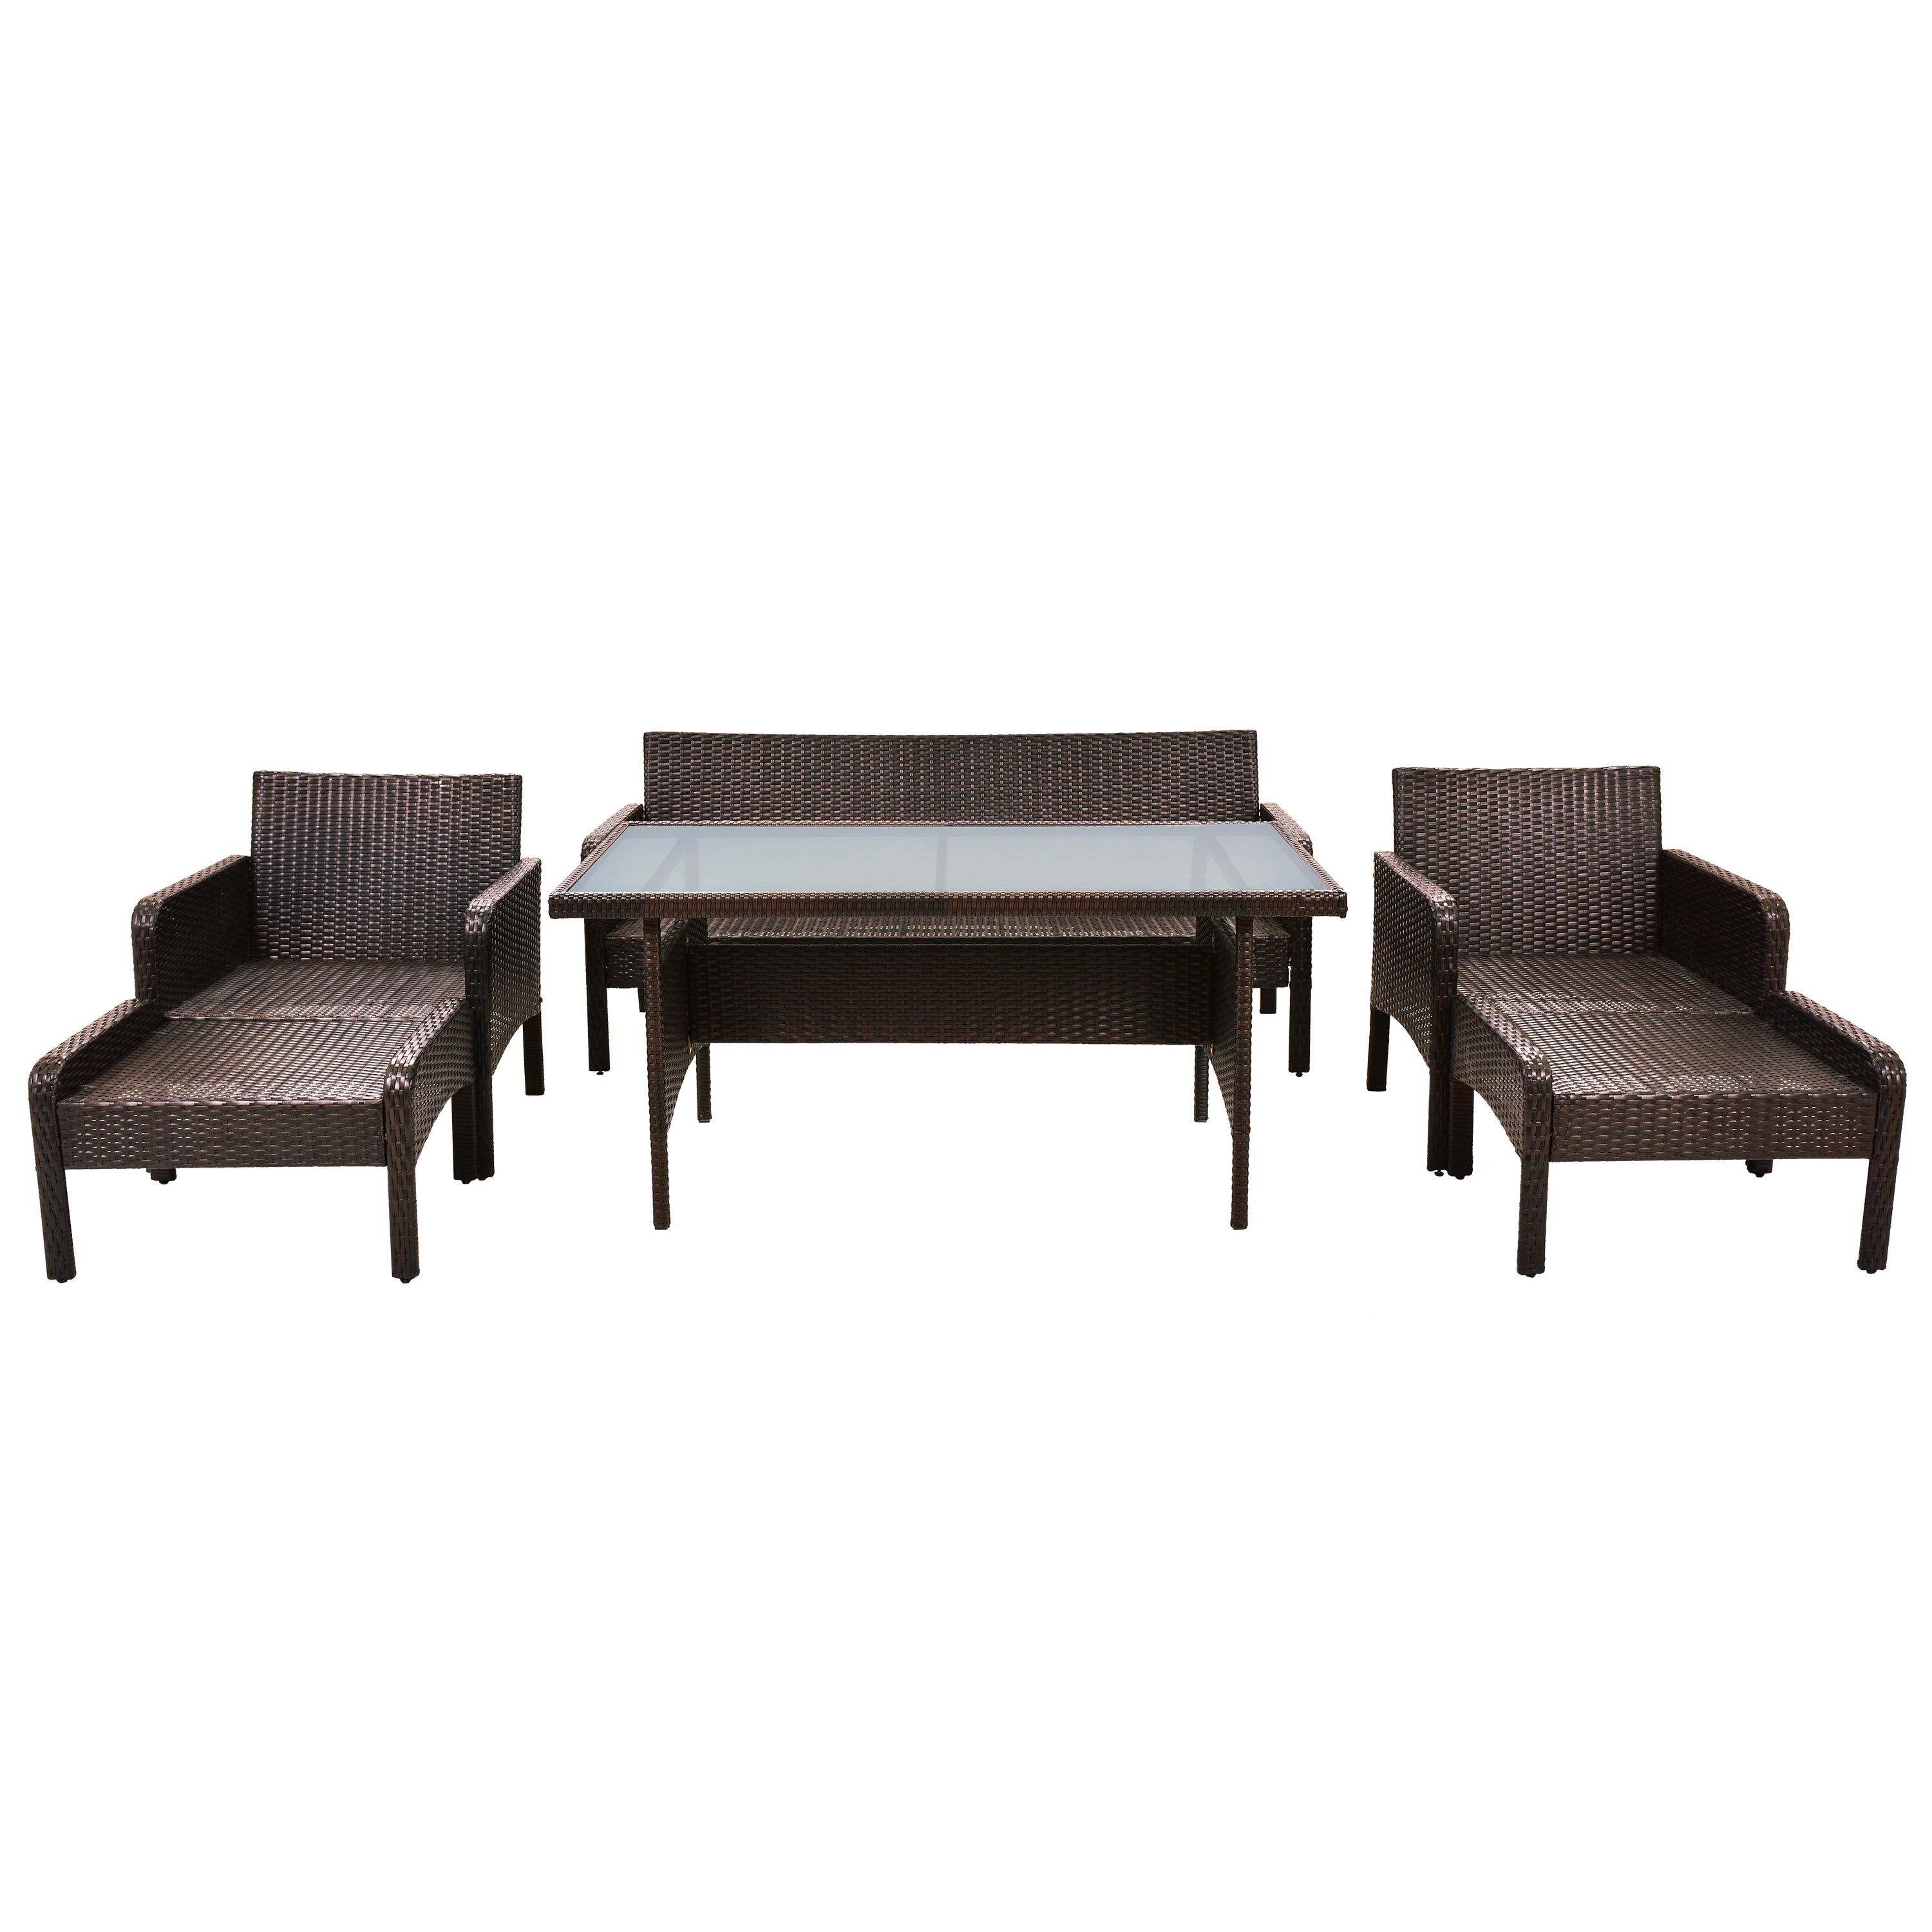 6-Piece Outdoor Rattan Sofa Set with Dining Table, Removable Cushions and Tempered Glass Tea Table, Brown Wicker+Light Coffee Cushion